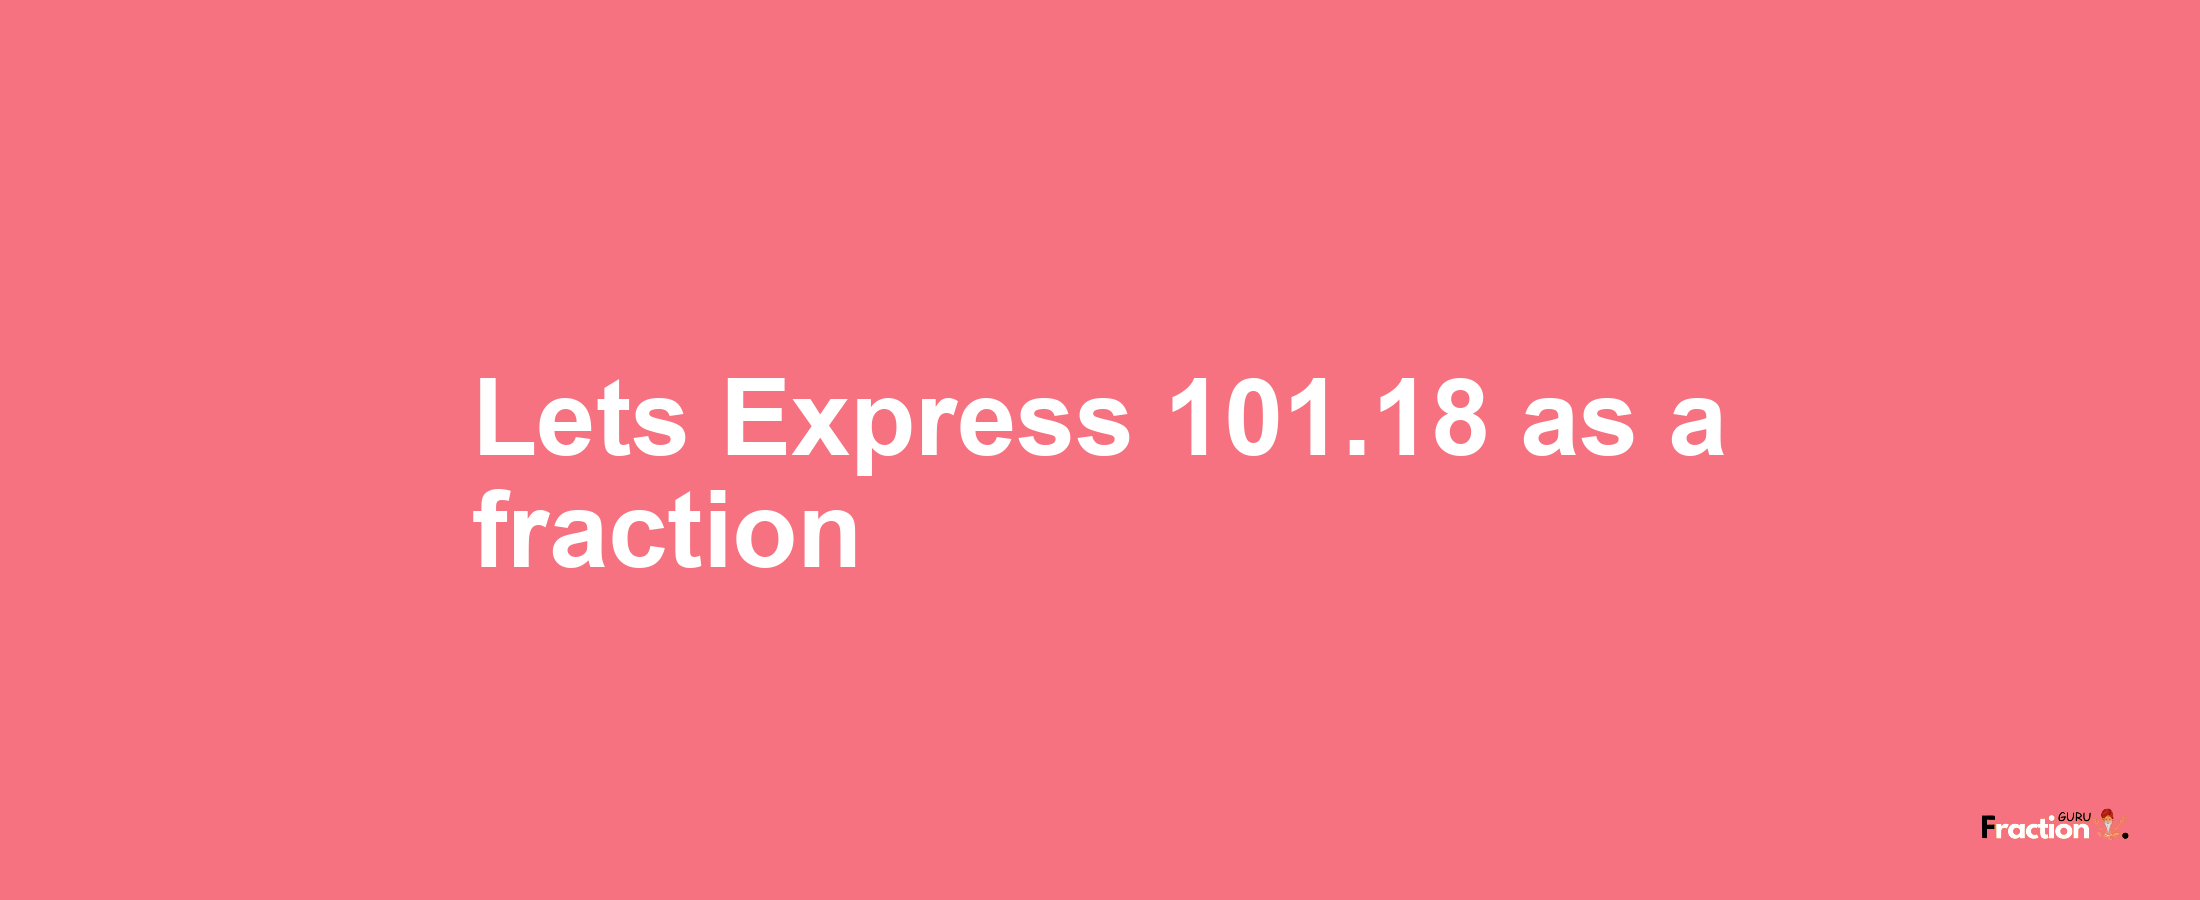 Lets Express 101.18 as afraction